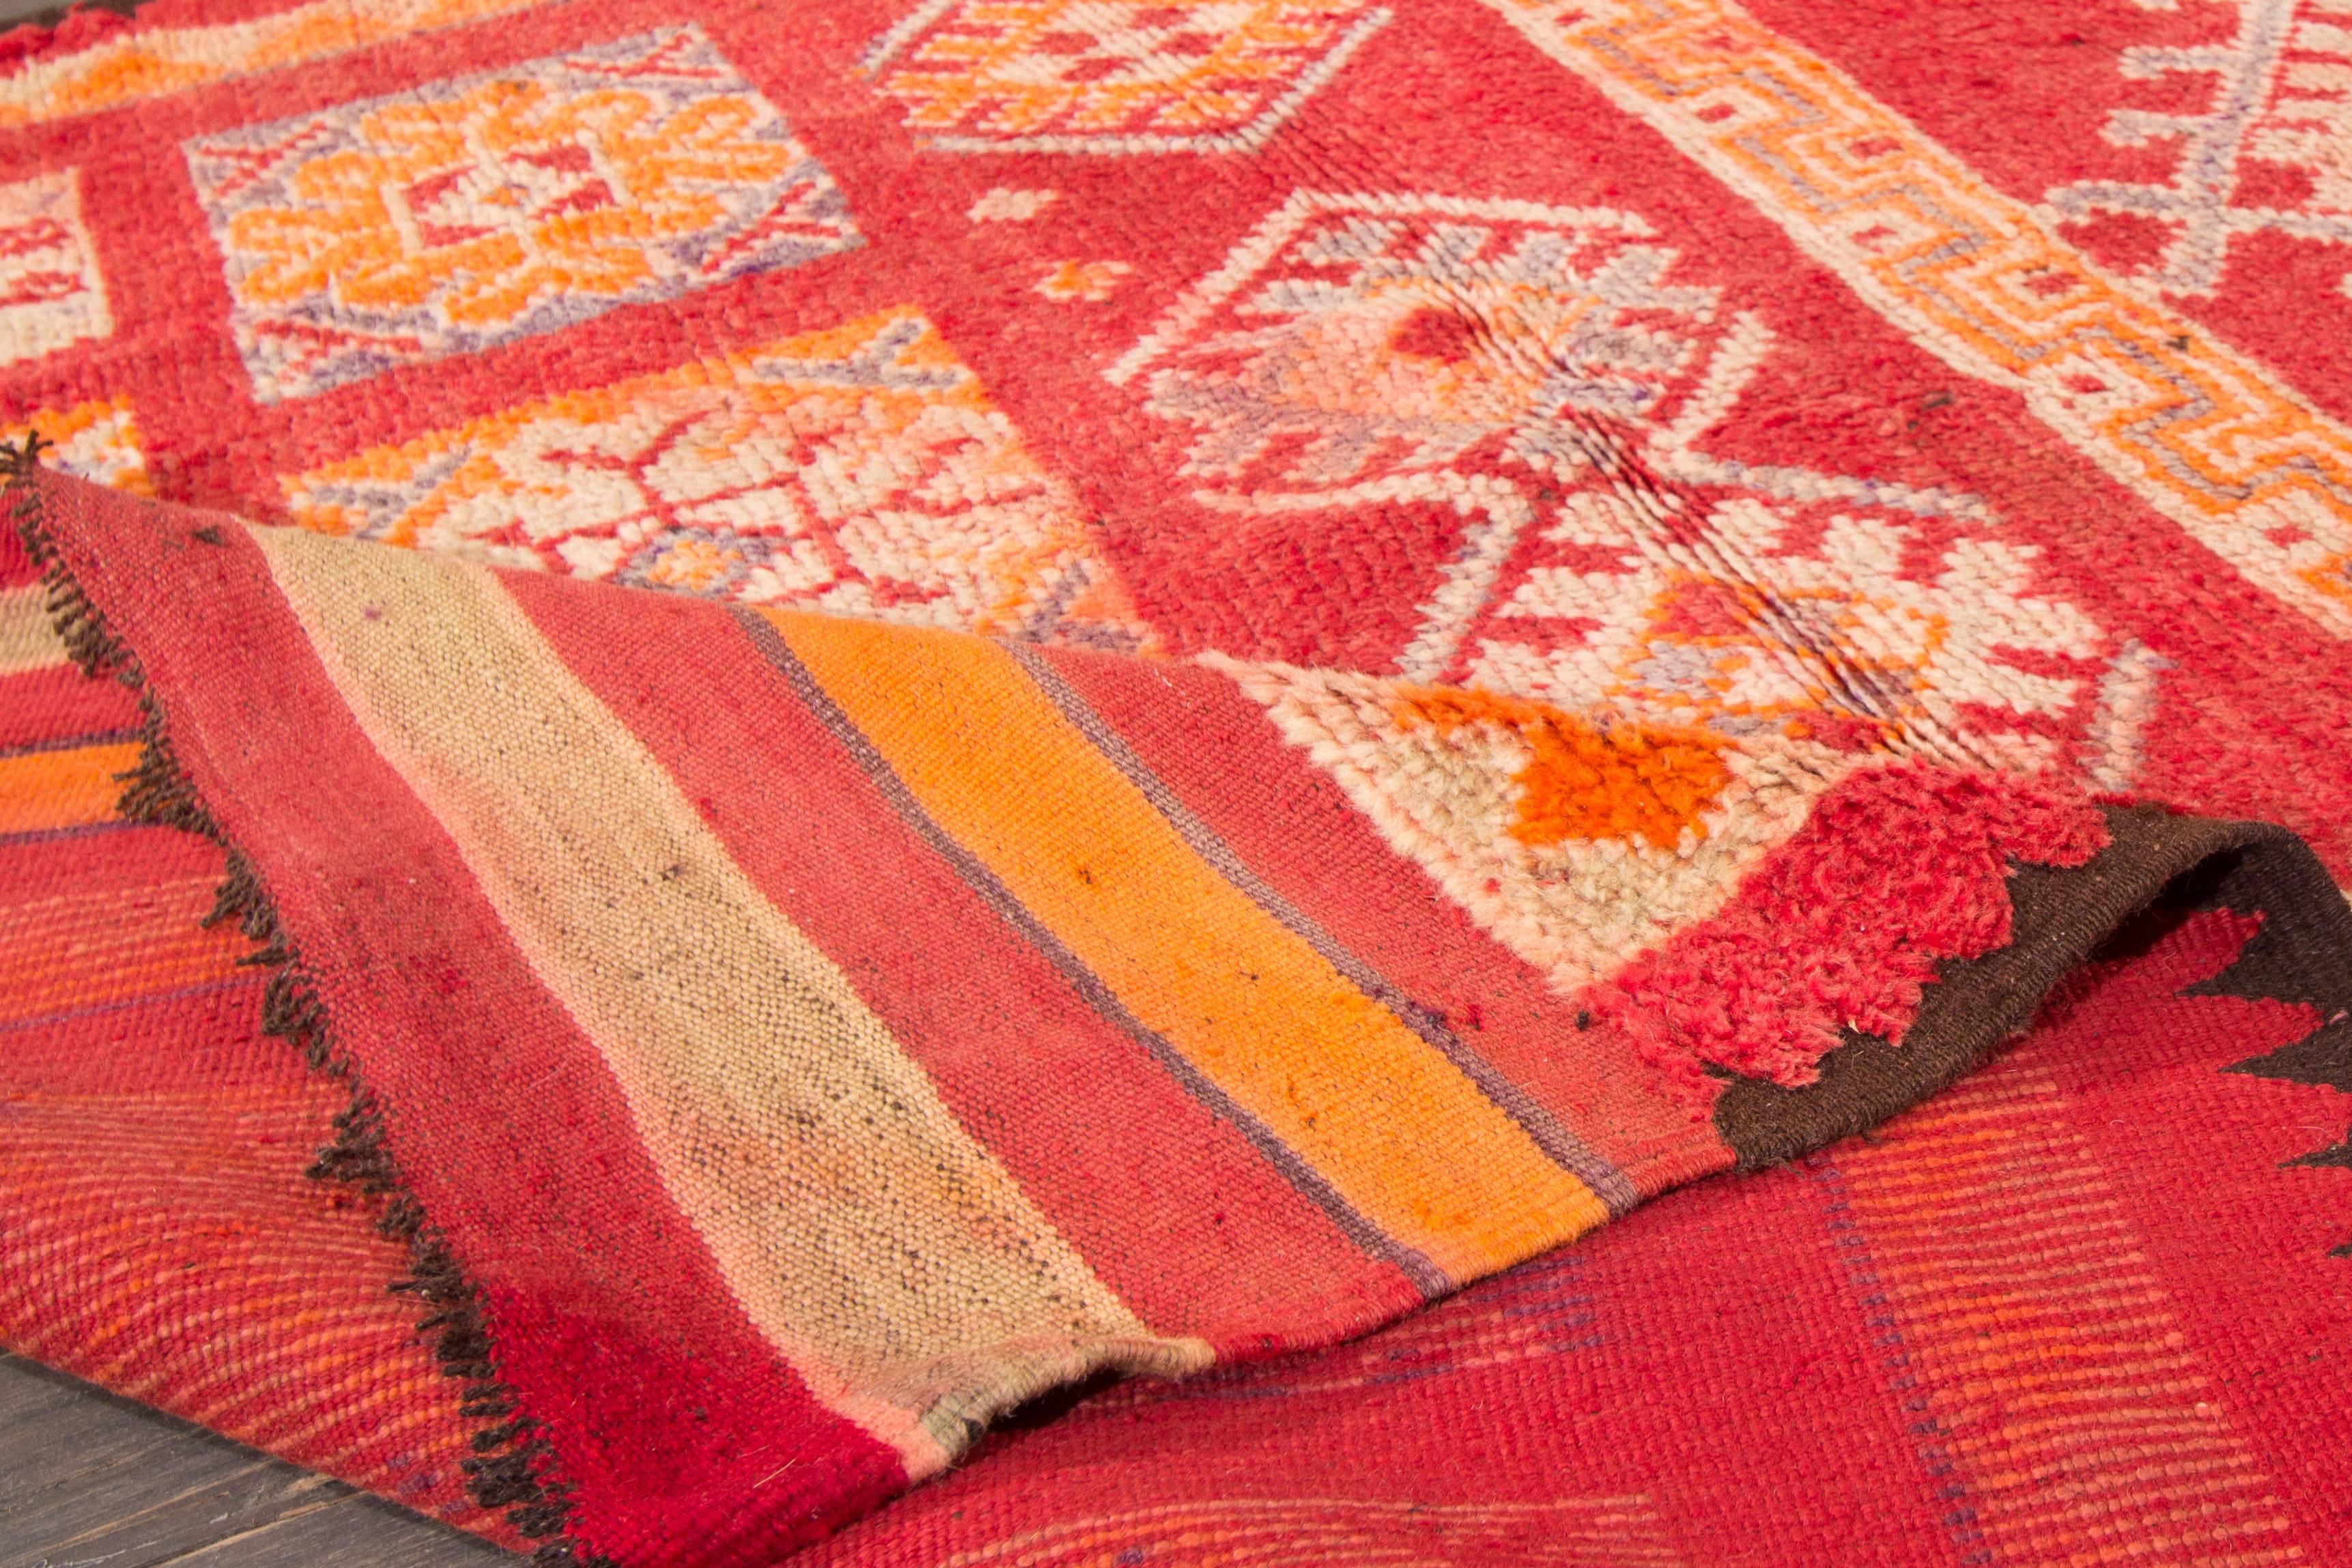 Vintage 1945 Moroccan rug with a bright red field and geometric designs in orange and blue tones. Measures 5.10x13.02.